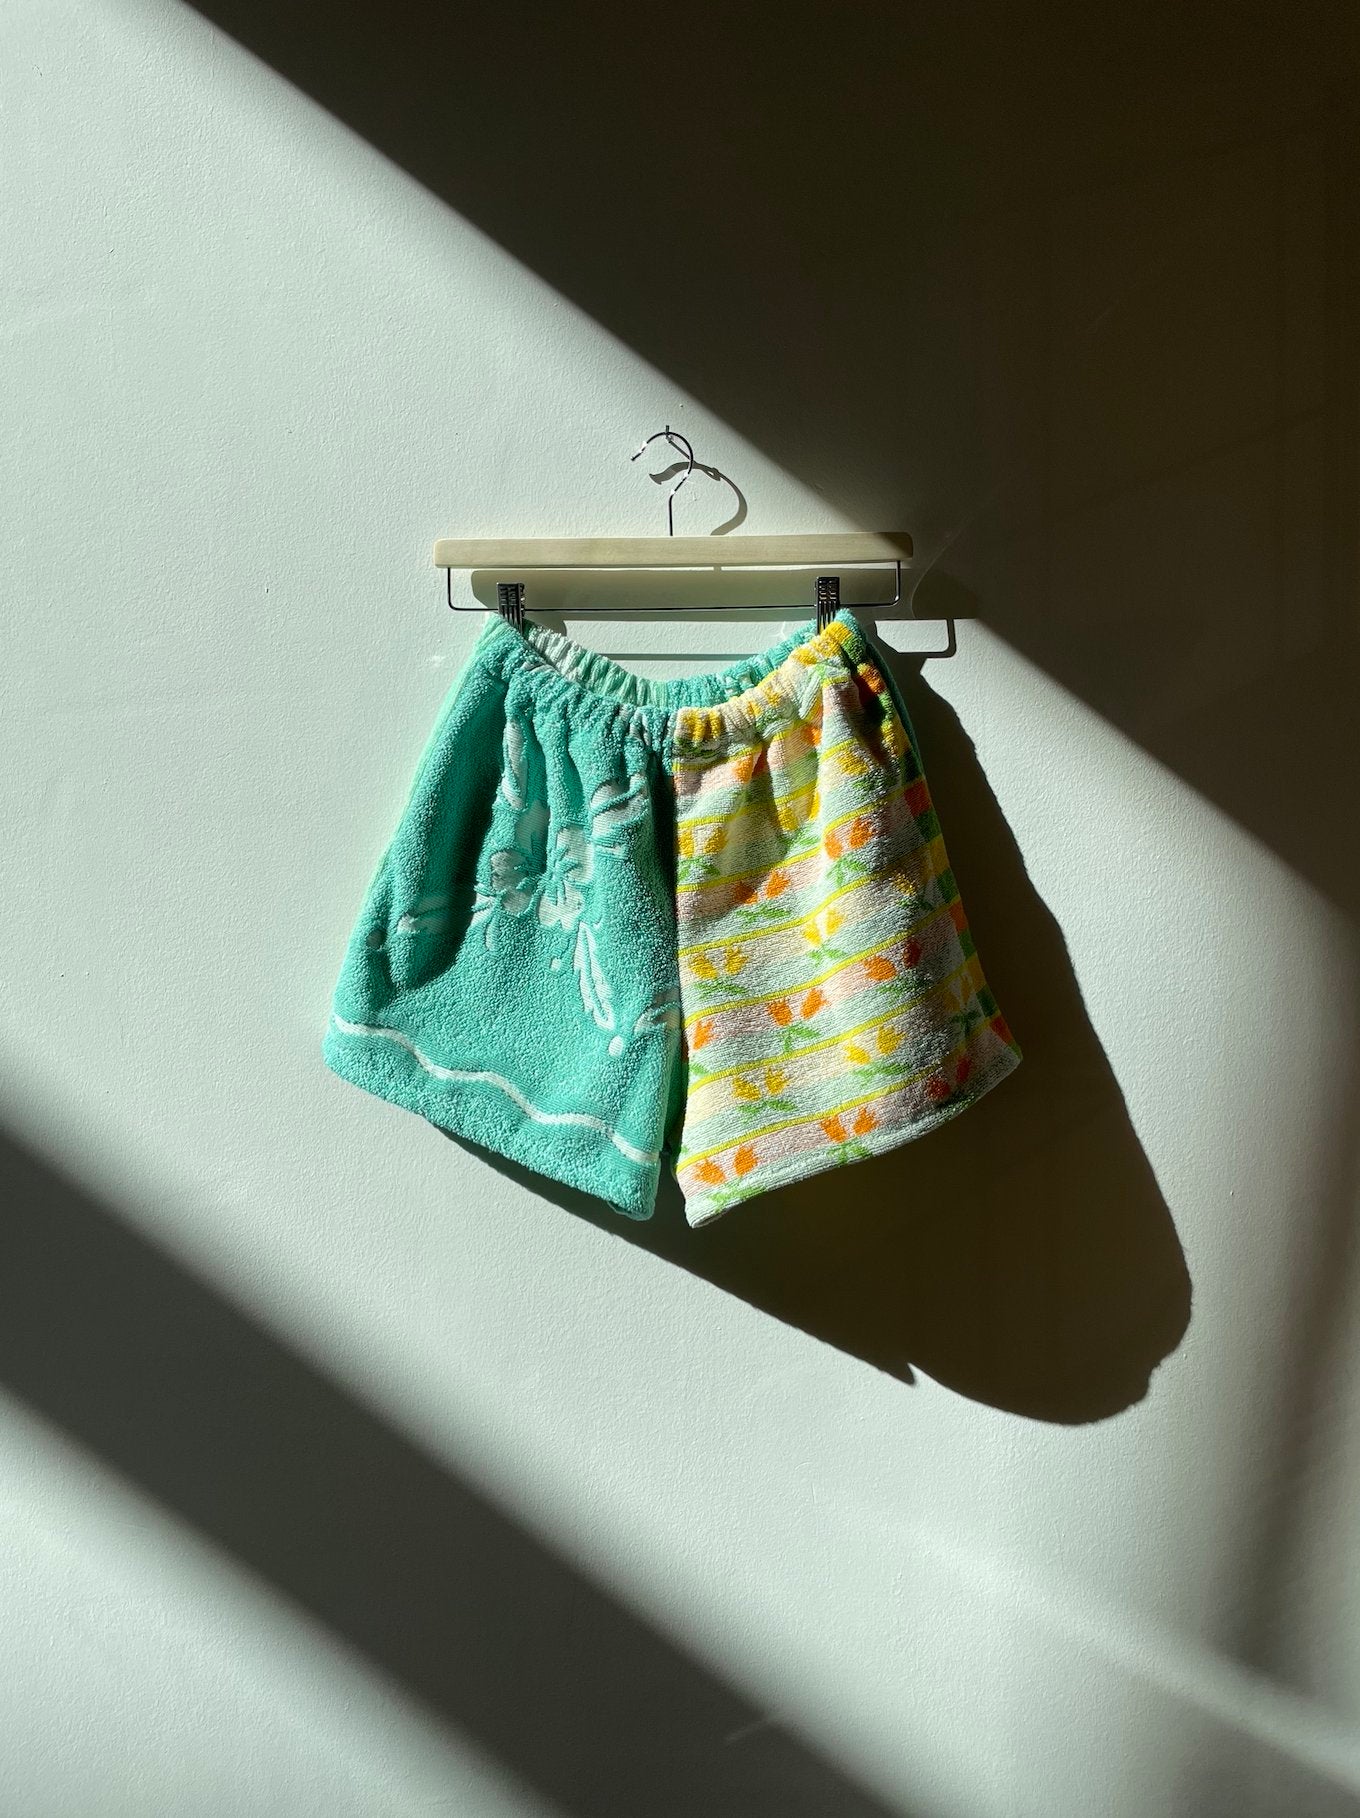 Shorts aus Vintage Frottee, two-tone, handmade in Hamburg, Germany